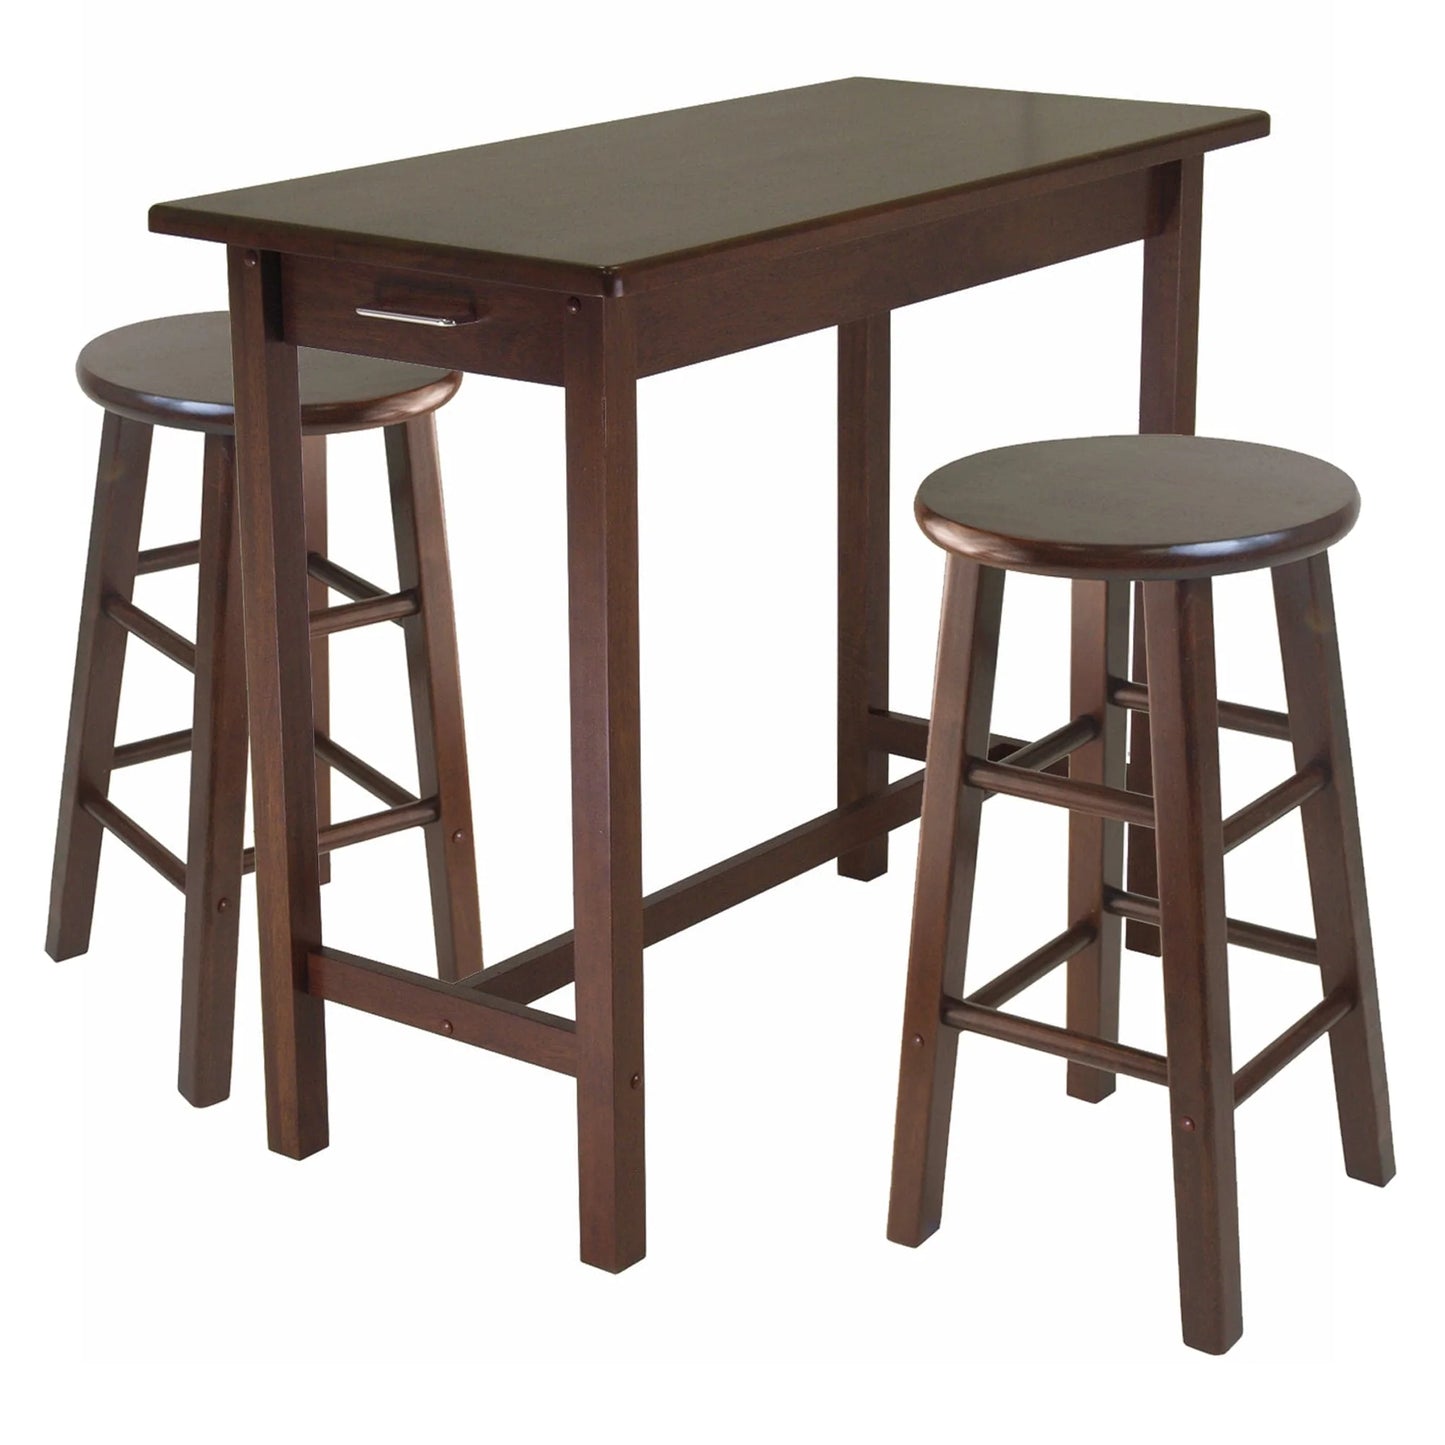 WINSOME Pub Table Set Sally 3-Pc Breakfast Table Set with Counter Stools, Walnut